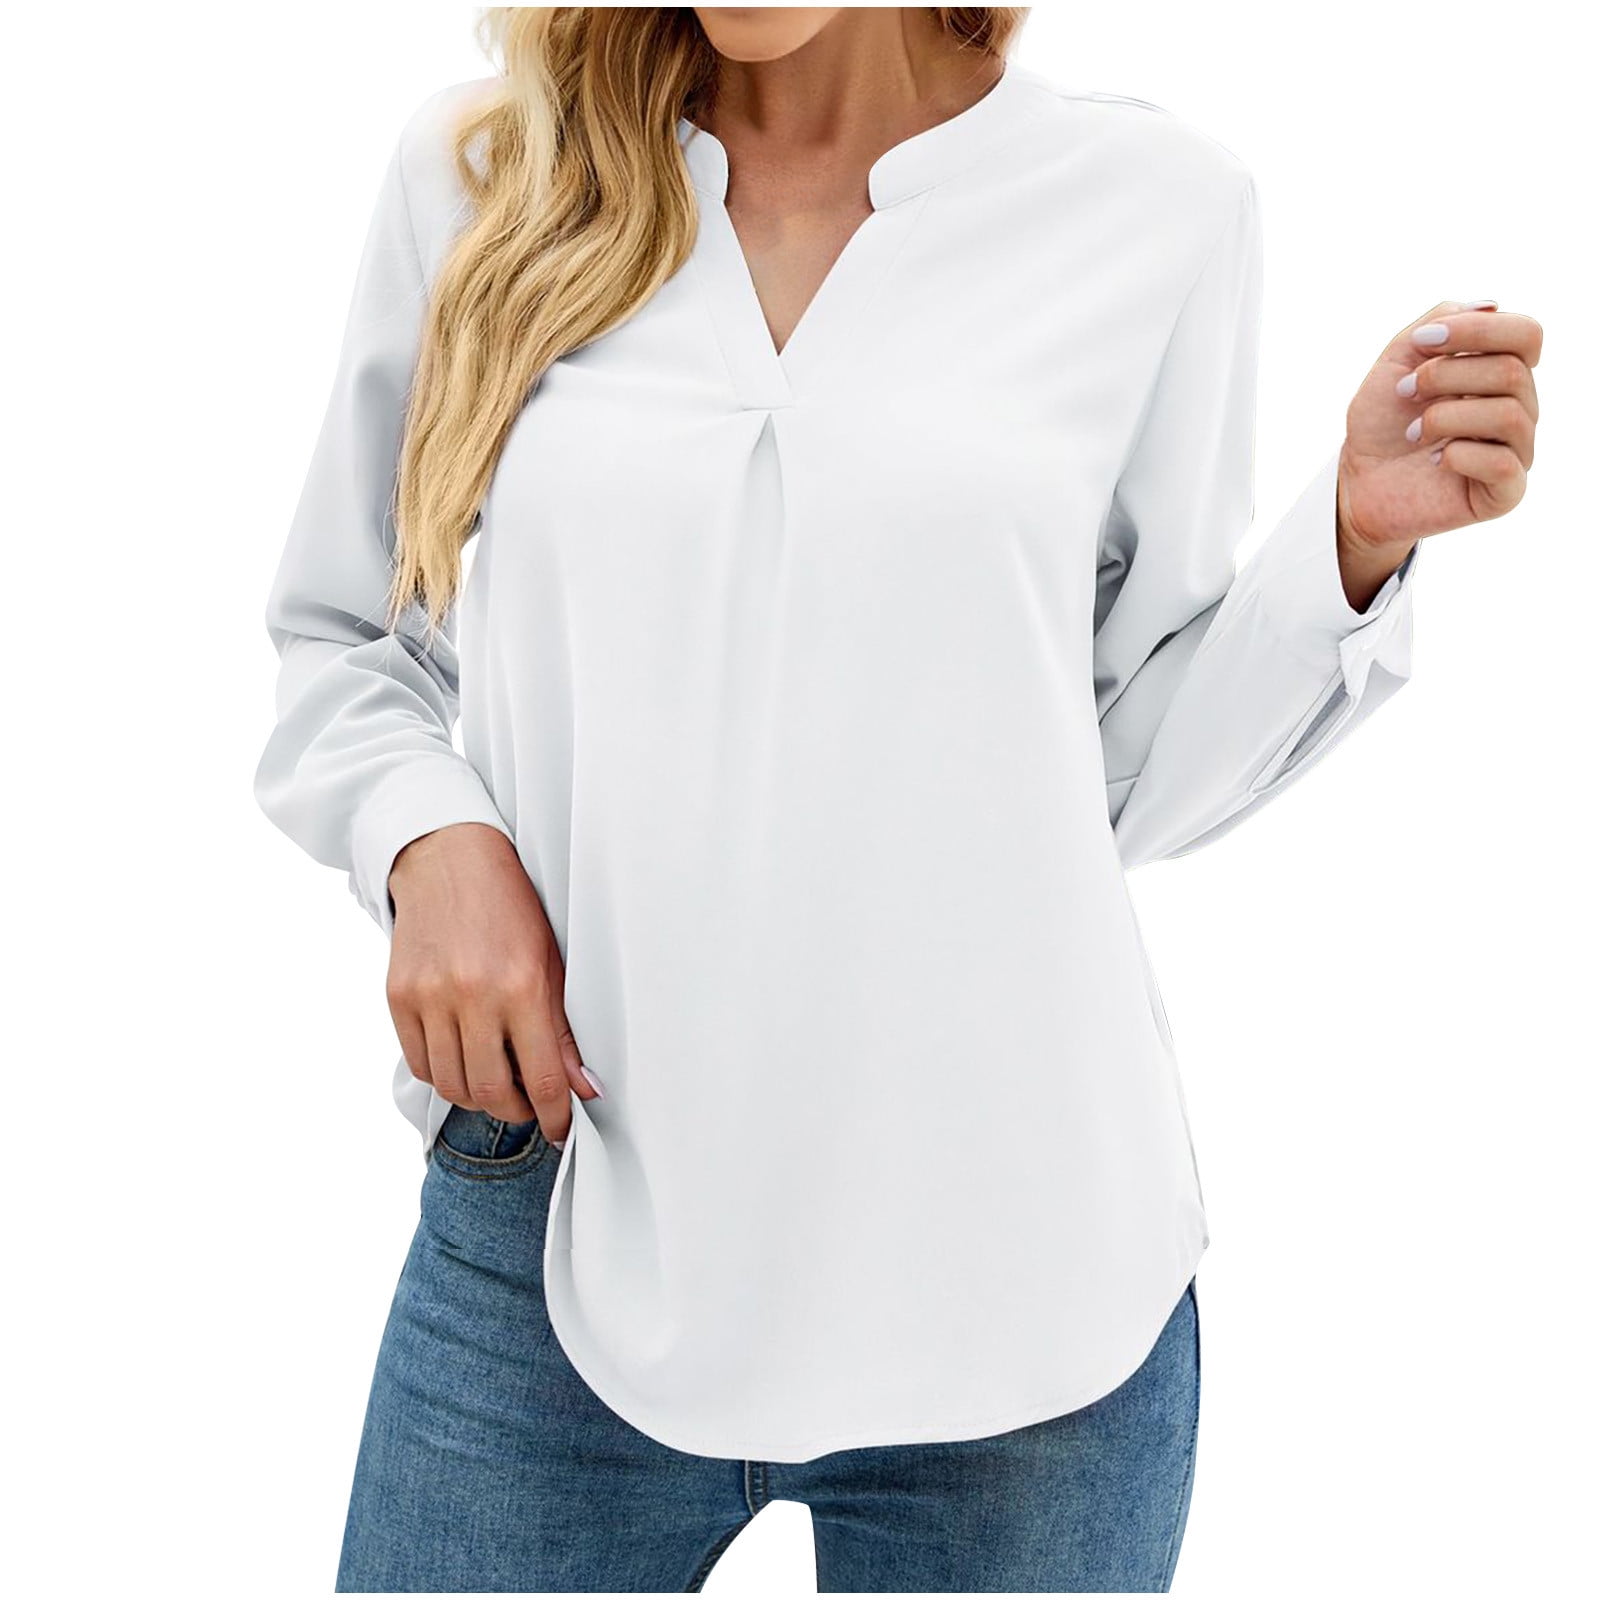 Scyoekwg Dressy Tops for Women Fall Fashion Comfy Fall Tunic Top Shirts  Button Shirts V Neck Lapel Classic Solid Color Long Sleeve Blouses  Lightweight